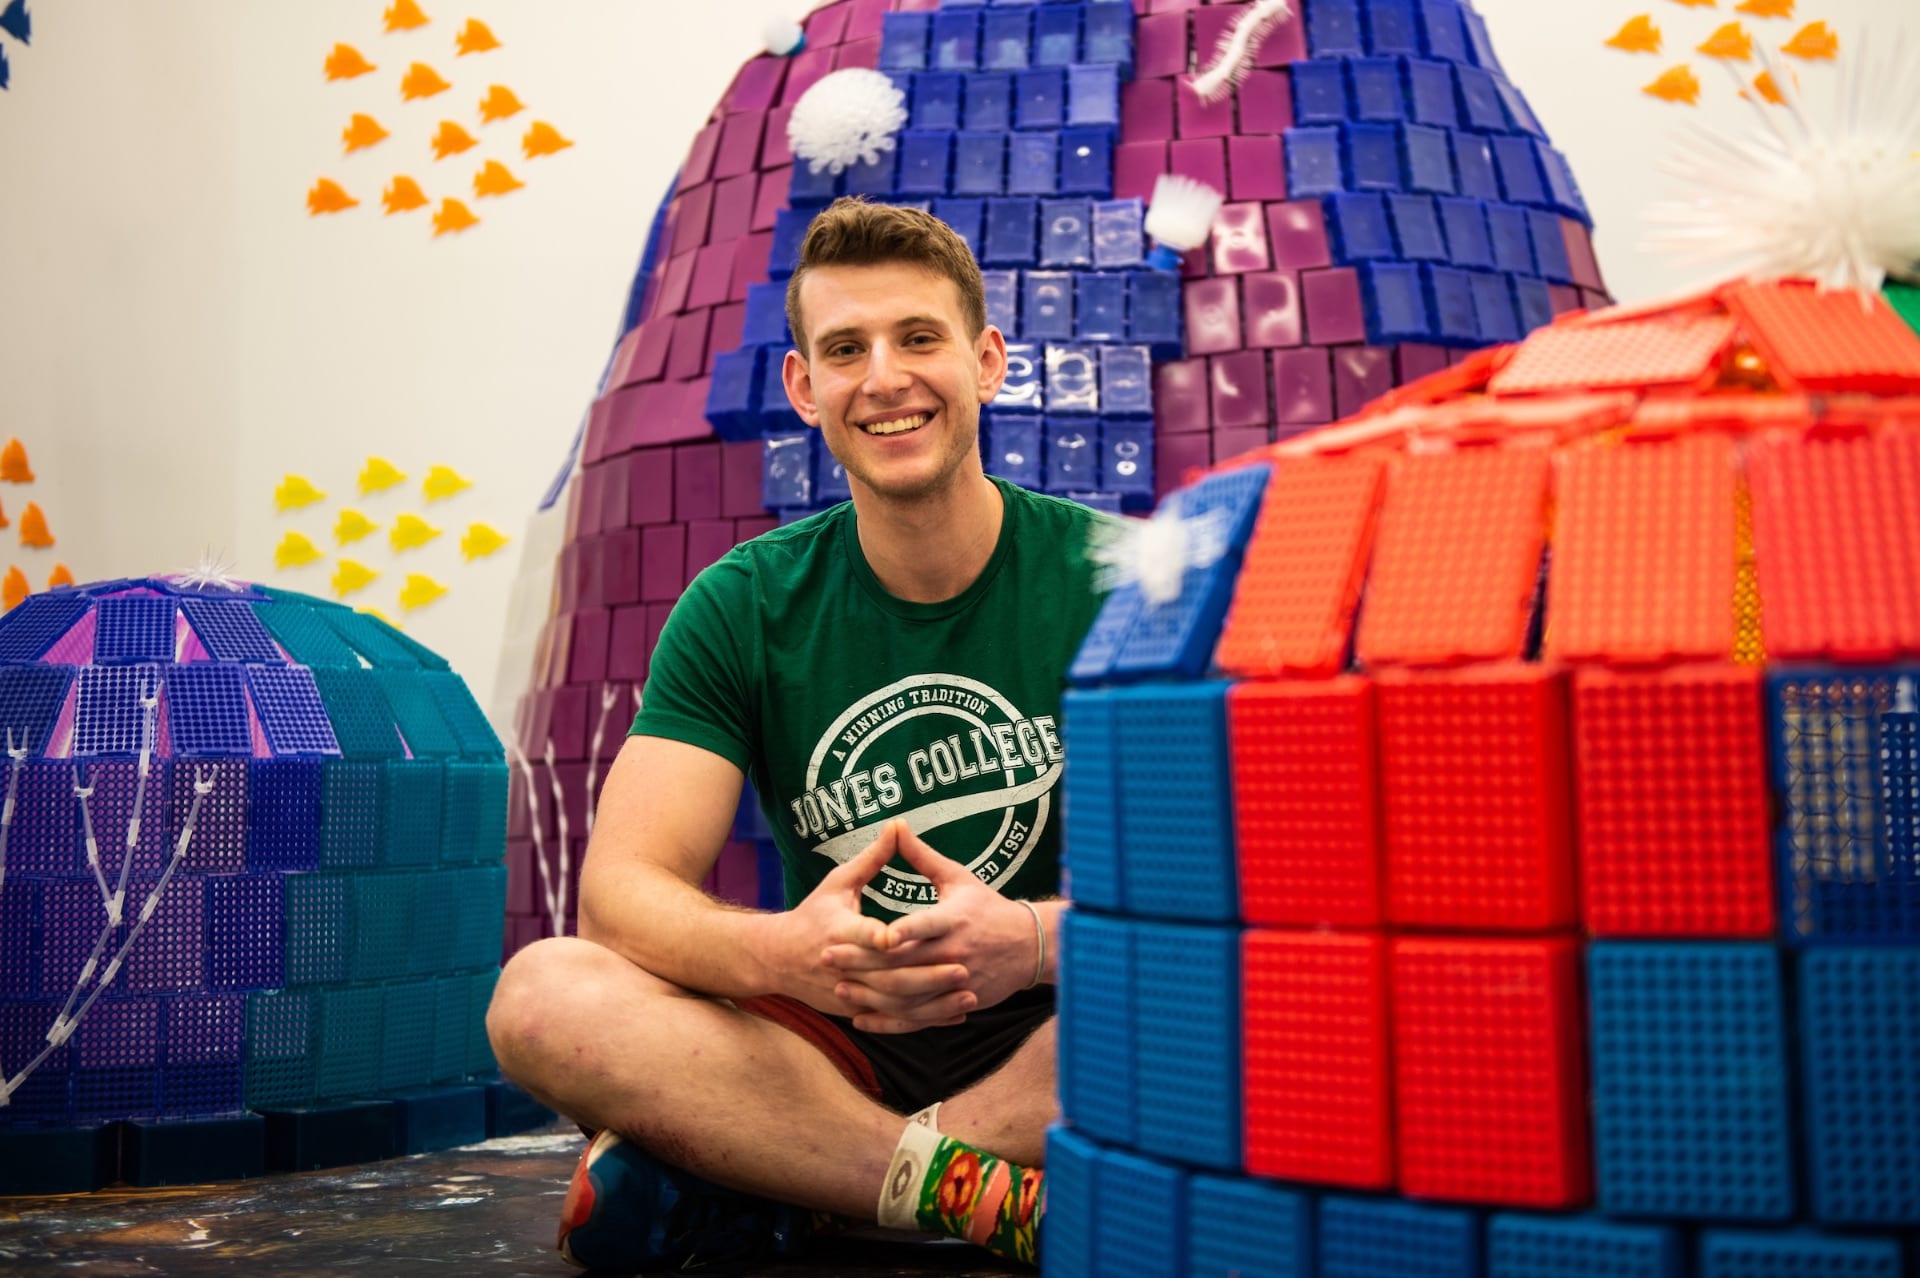 Recycled art: Students combat plastic waste by creating ‘coral reef’